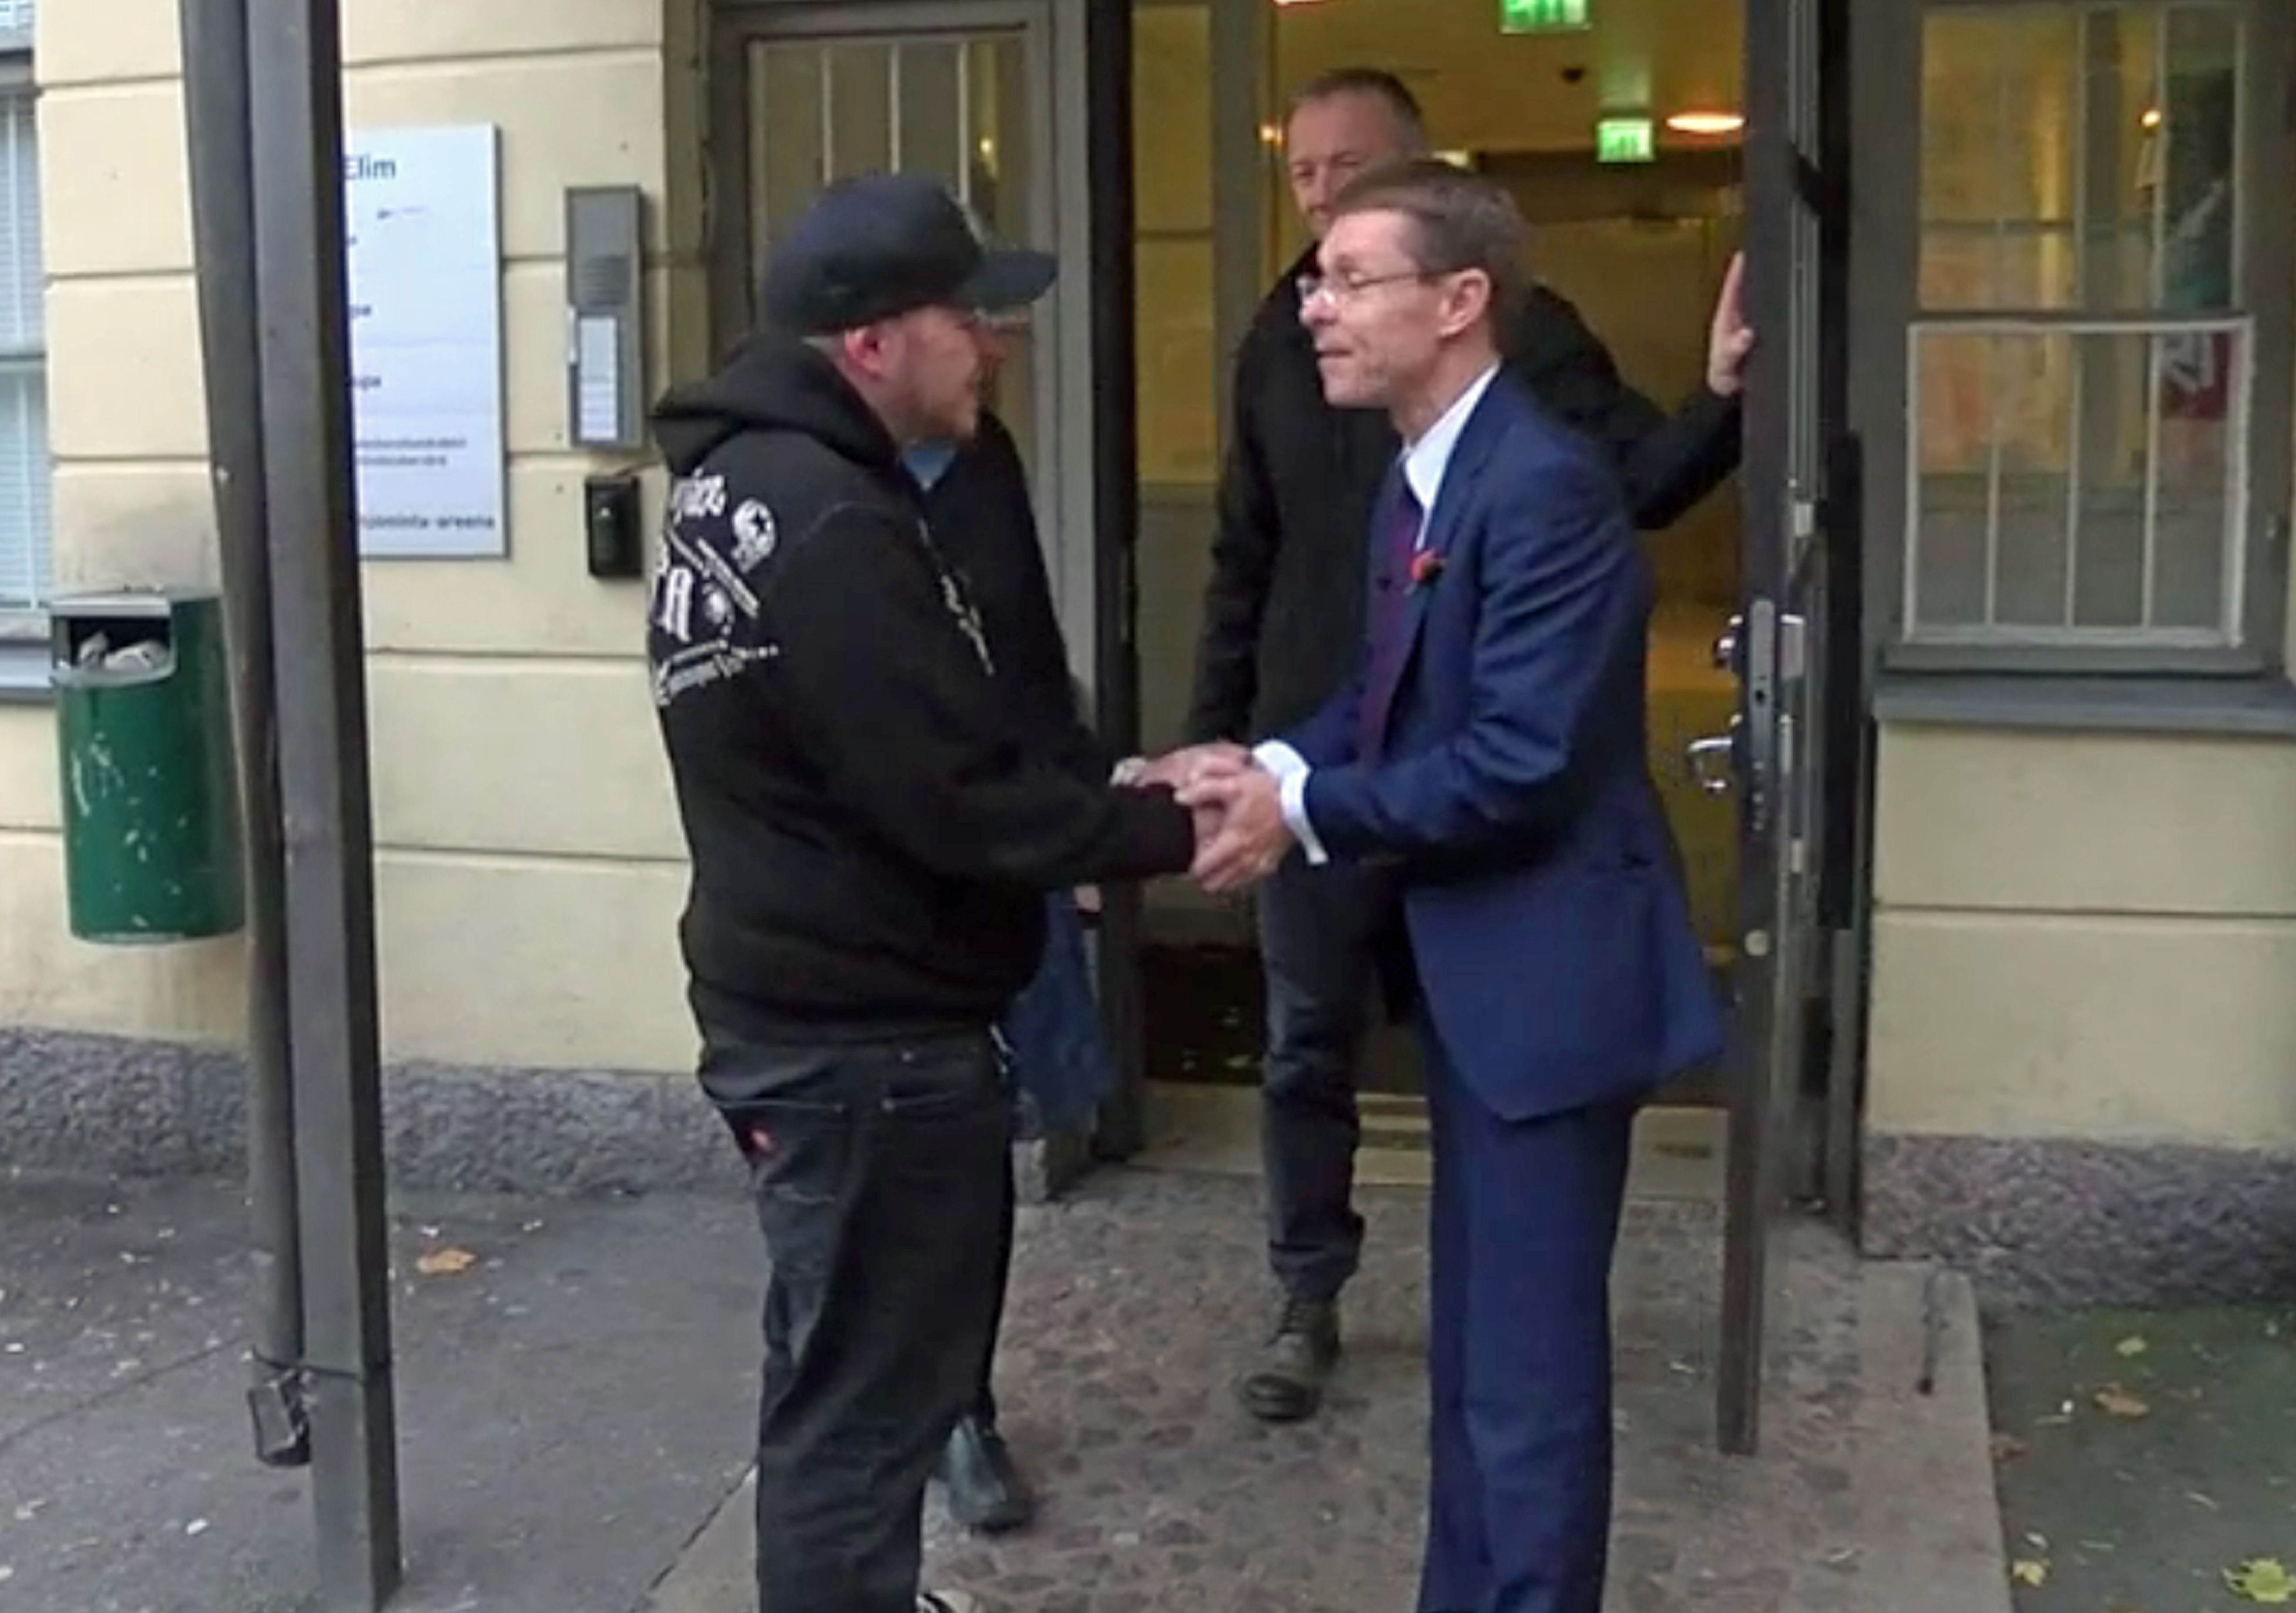 Mayor of the West Midlands Andy Street meets a beneficiary of the Homeless First scheme in Helsinki. (Picture: BBC Midlands Today).